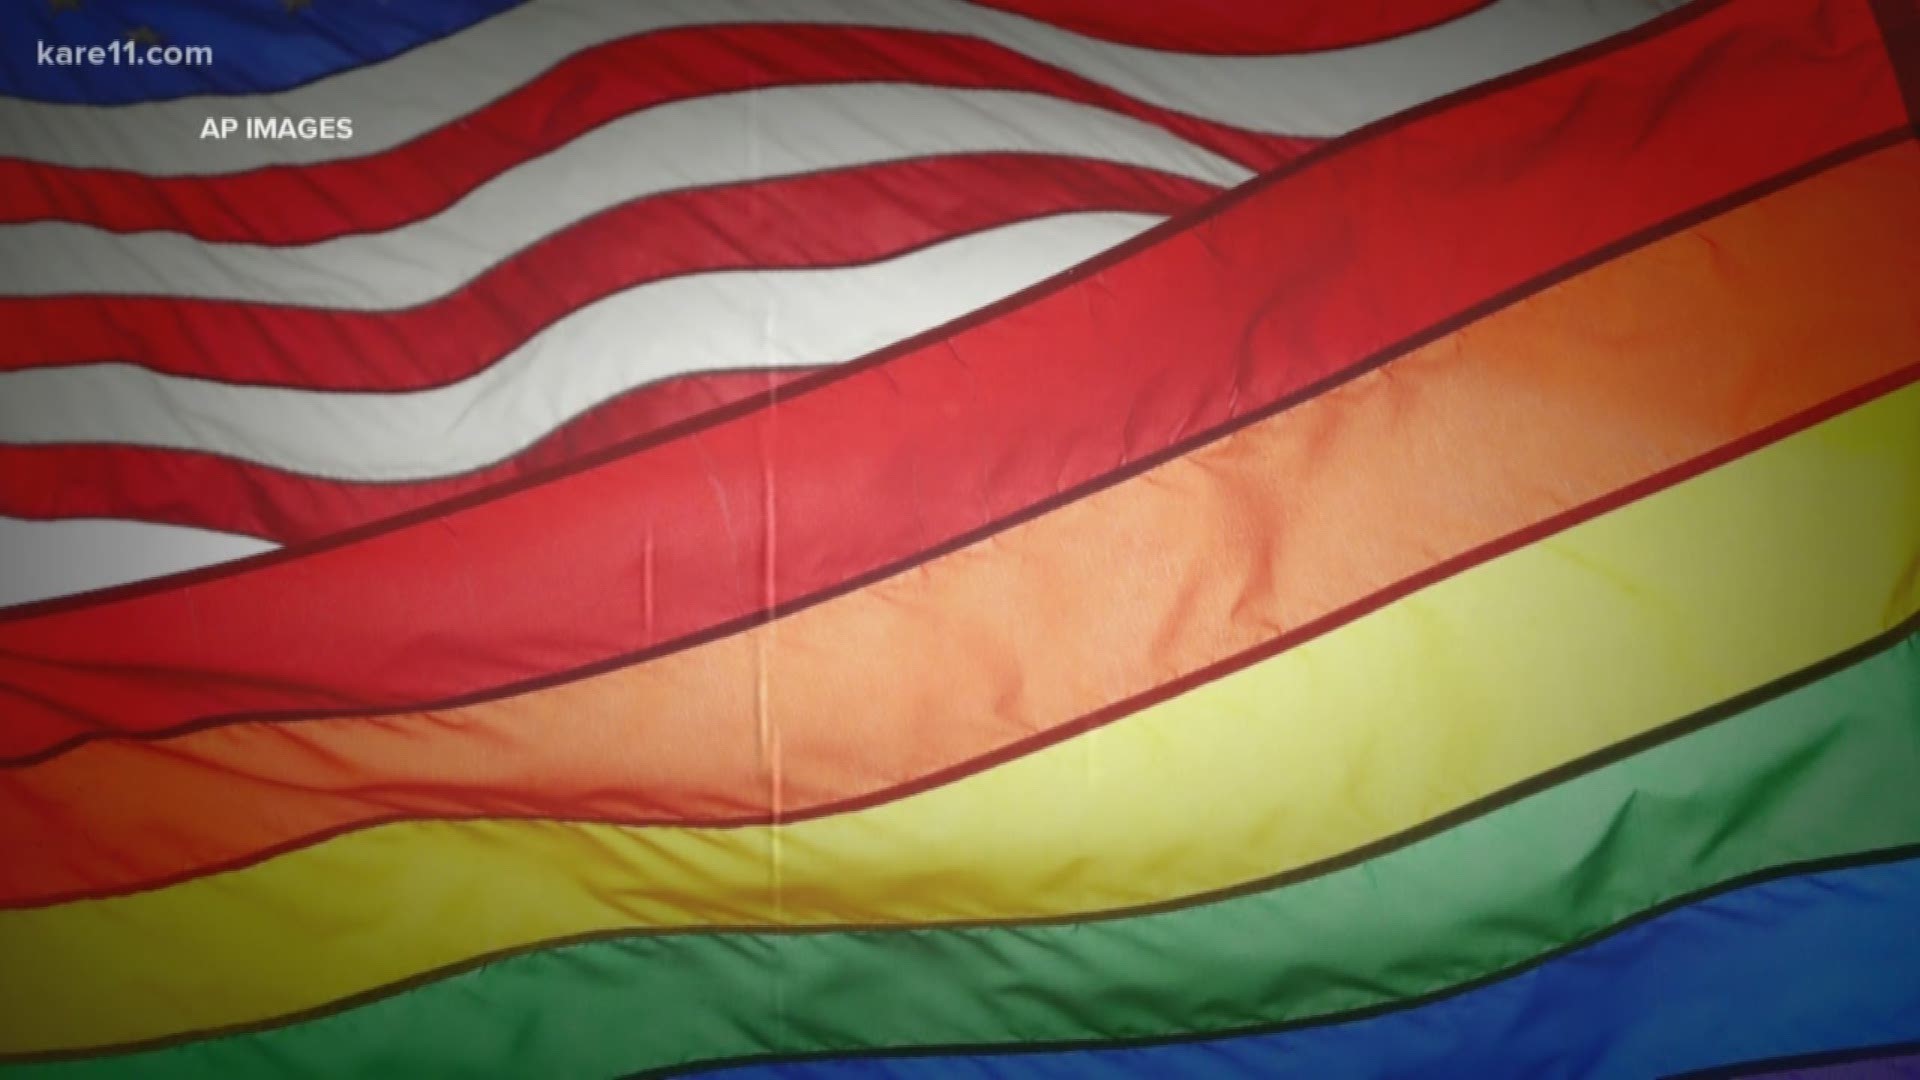 On Monday morning, the Supreme Court announced that it will weigh in next year on whether or not LGBT people should be included in the employment protections of the Civil Rights Act. https://kare11.tv/2viHwRy